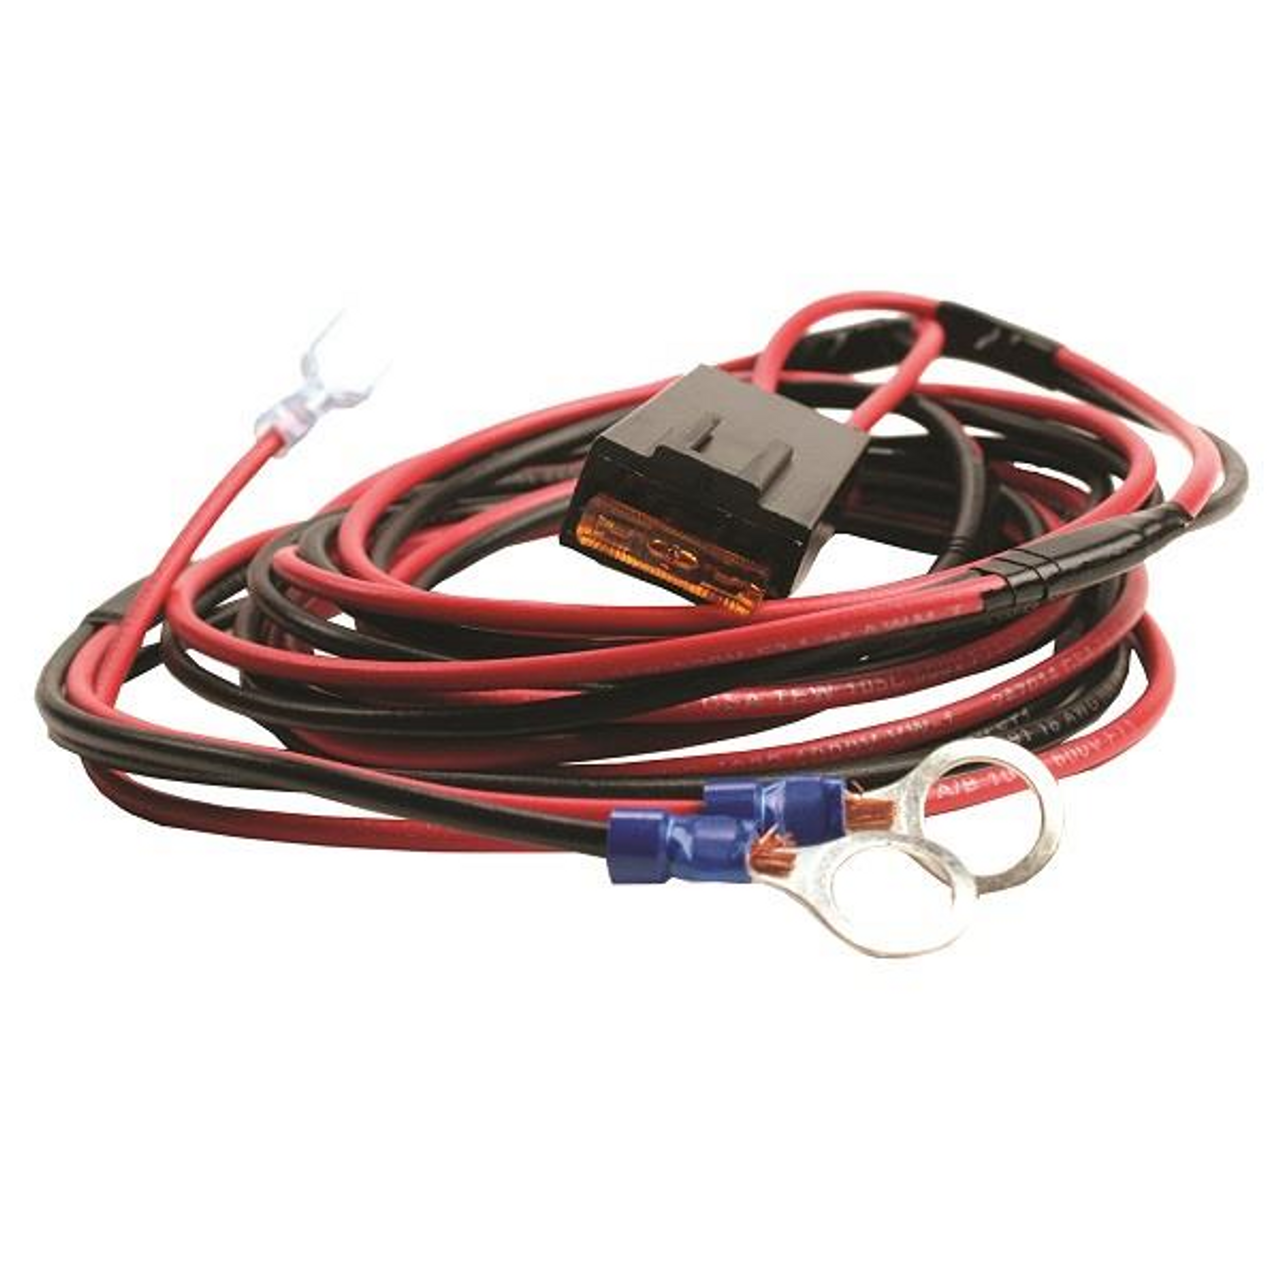 Wire Harness 8 - 16 gauge wire, terminals with 5 amp, 31750